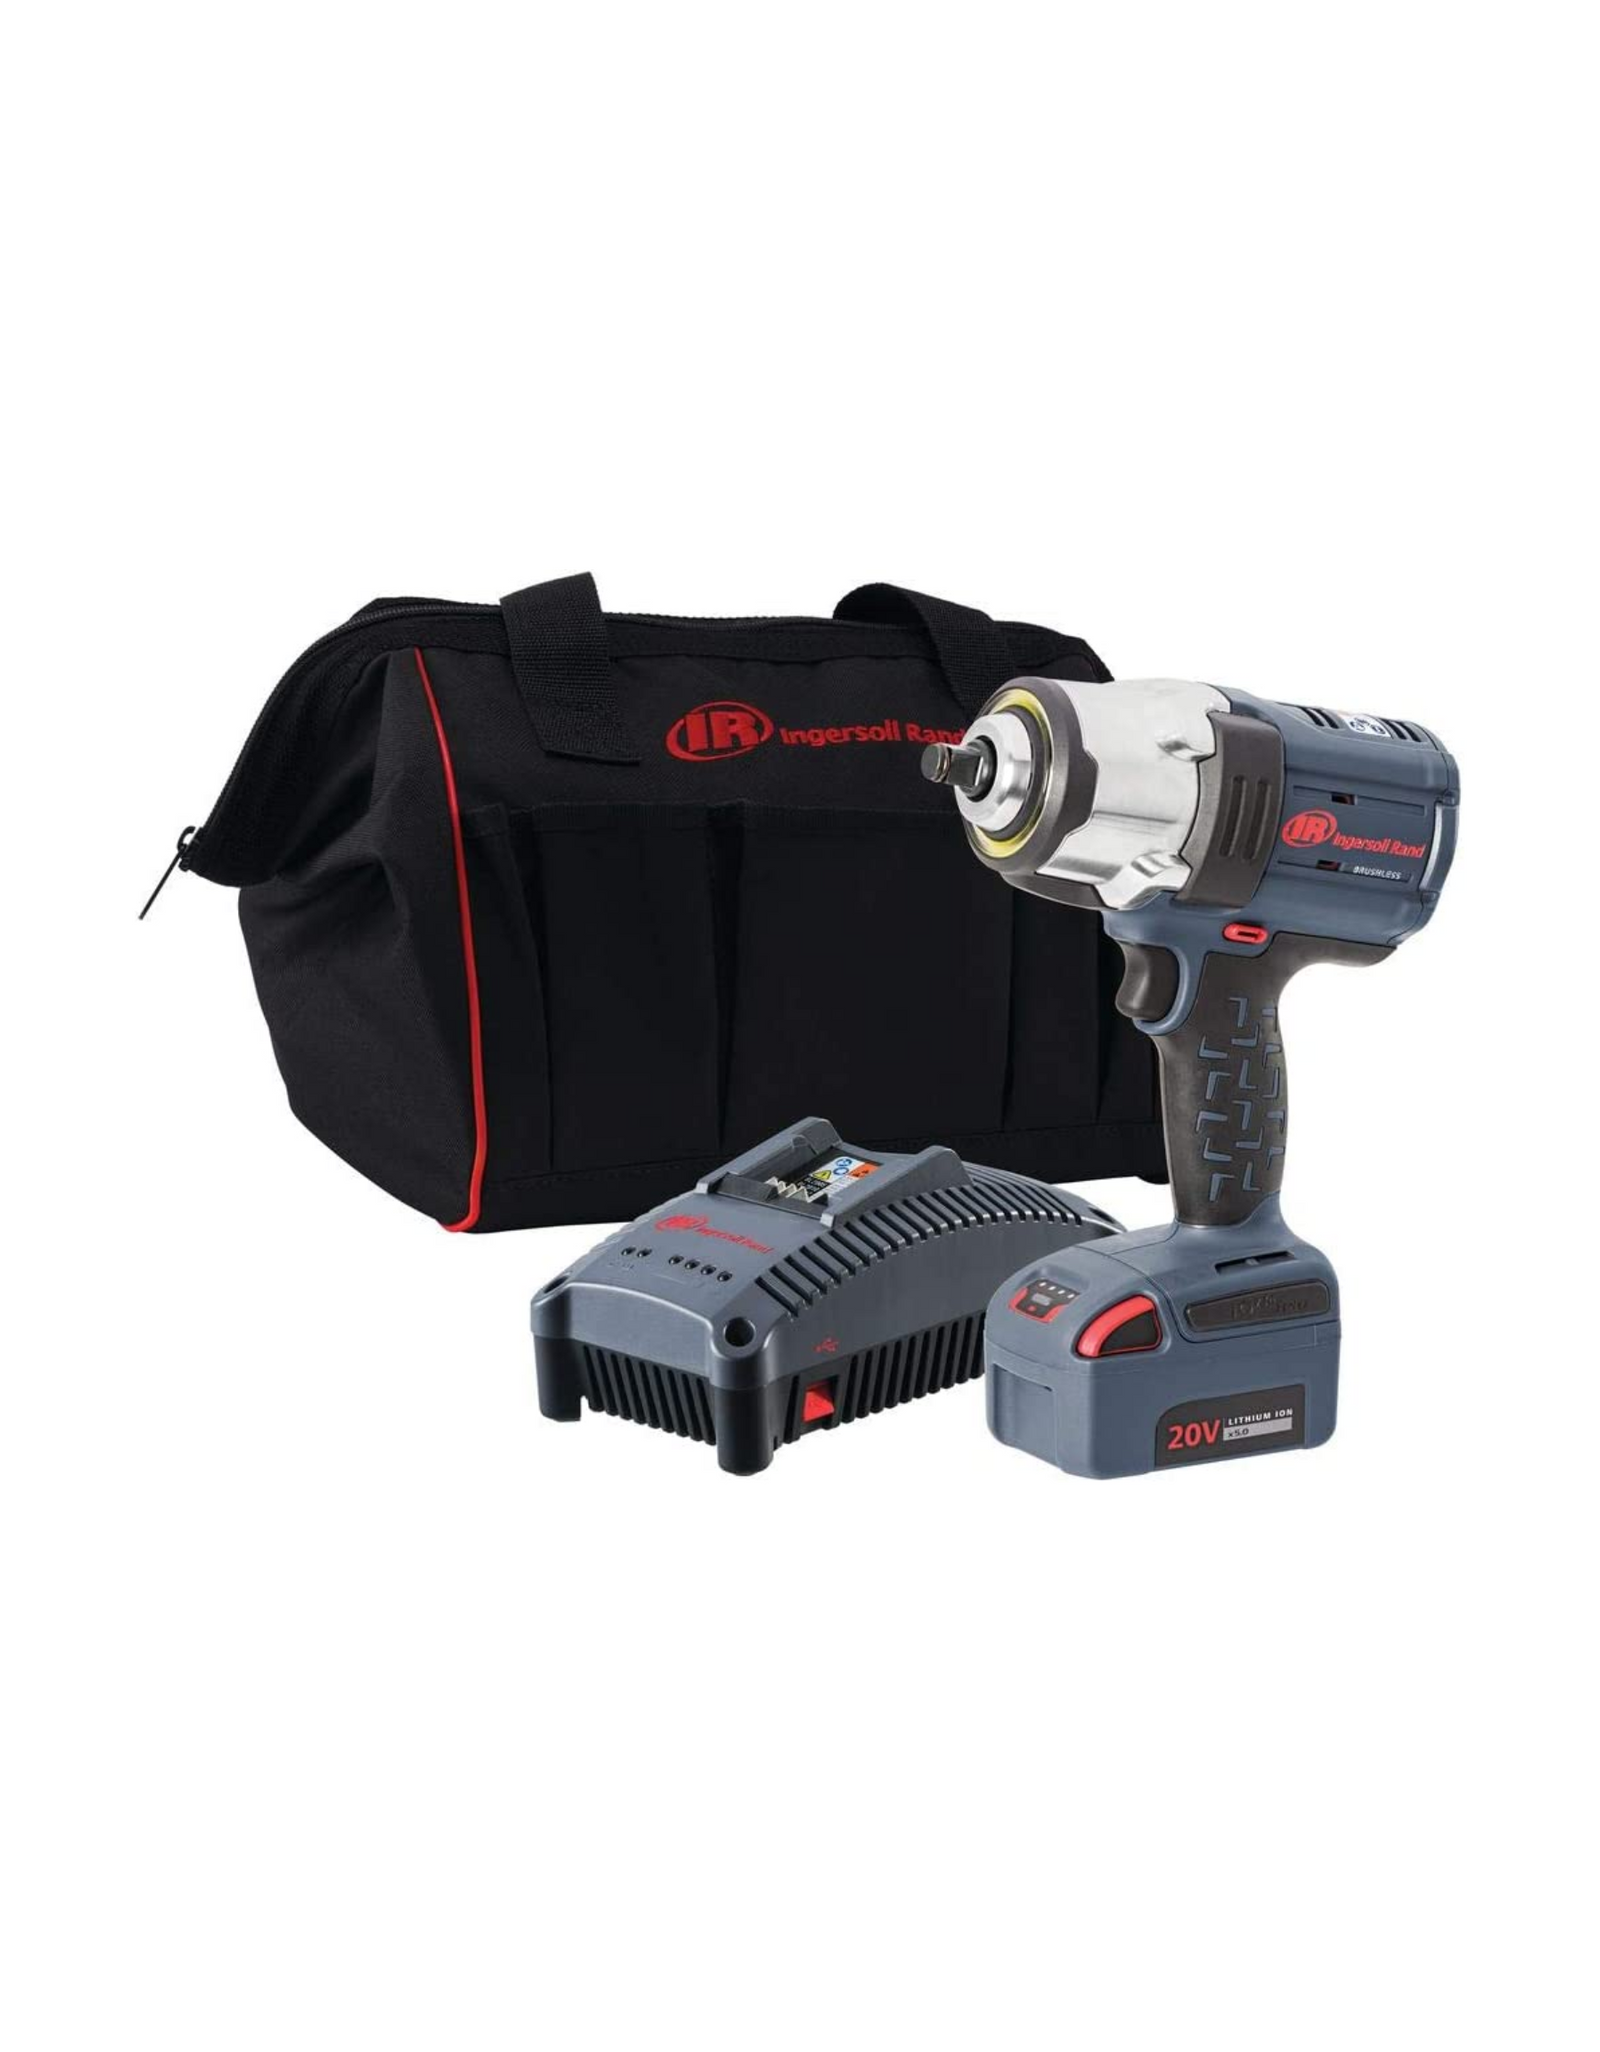 Ingersoll Rand W7152-K12 1/2 Inch Cordless Impact Wrench and 1 Battery Kit